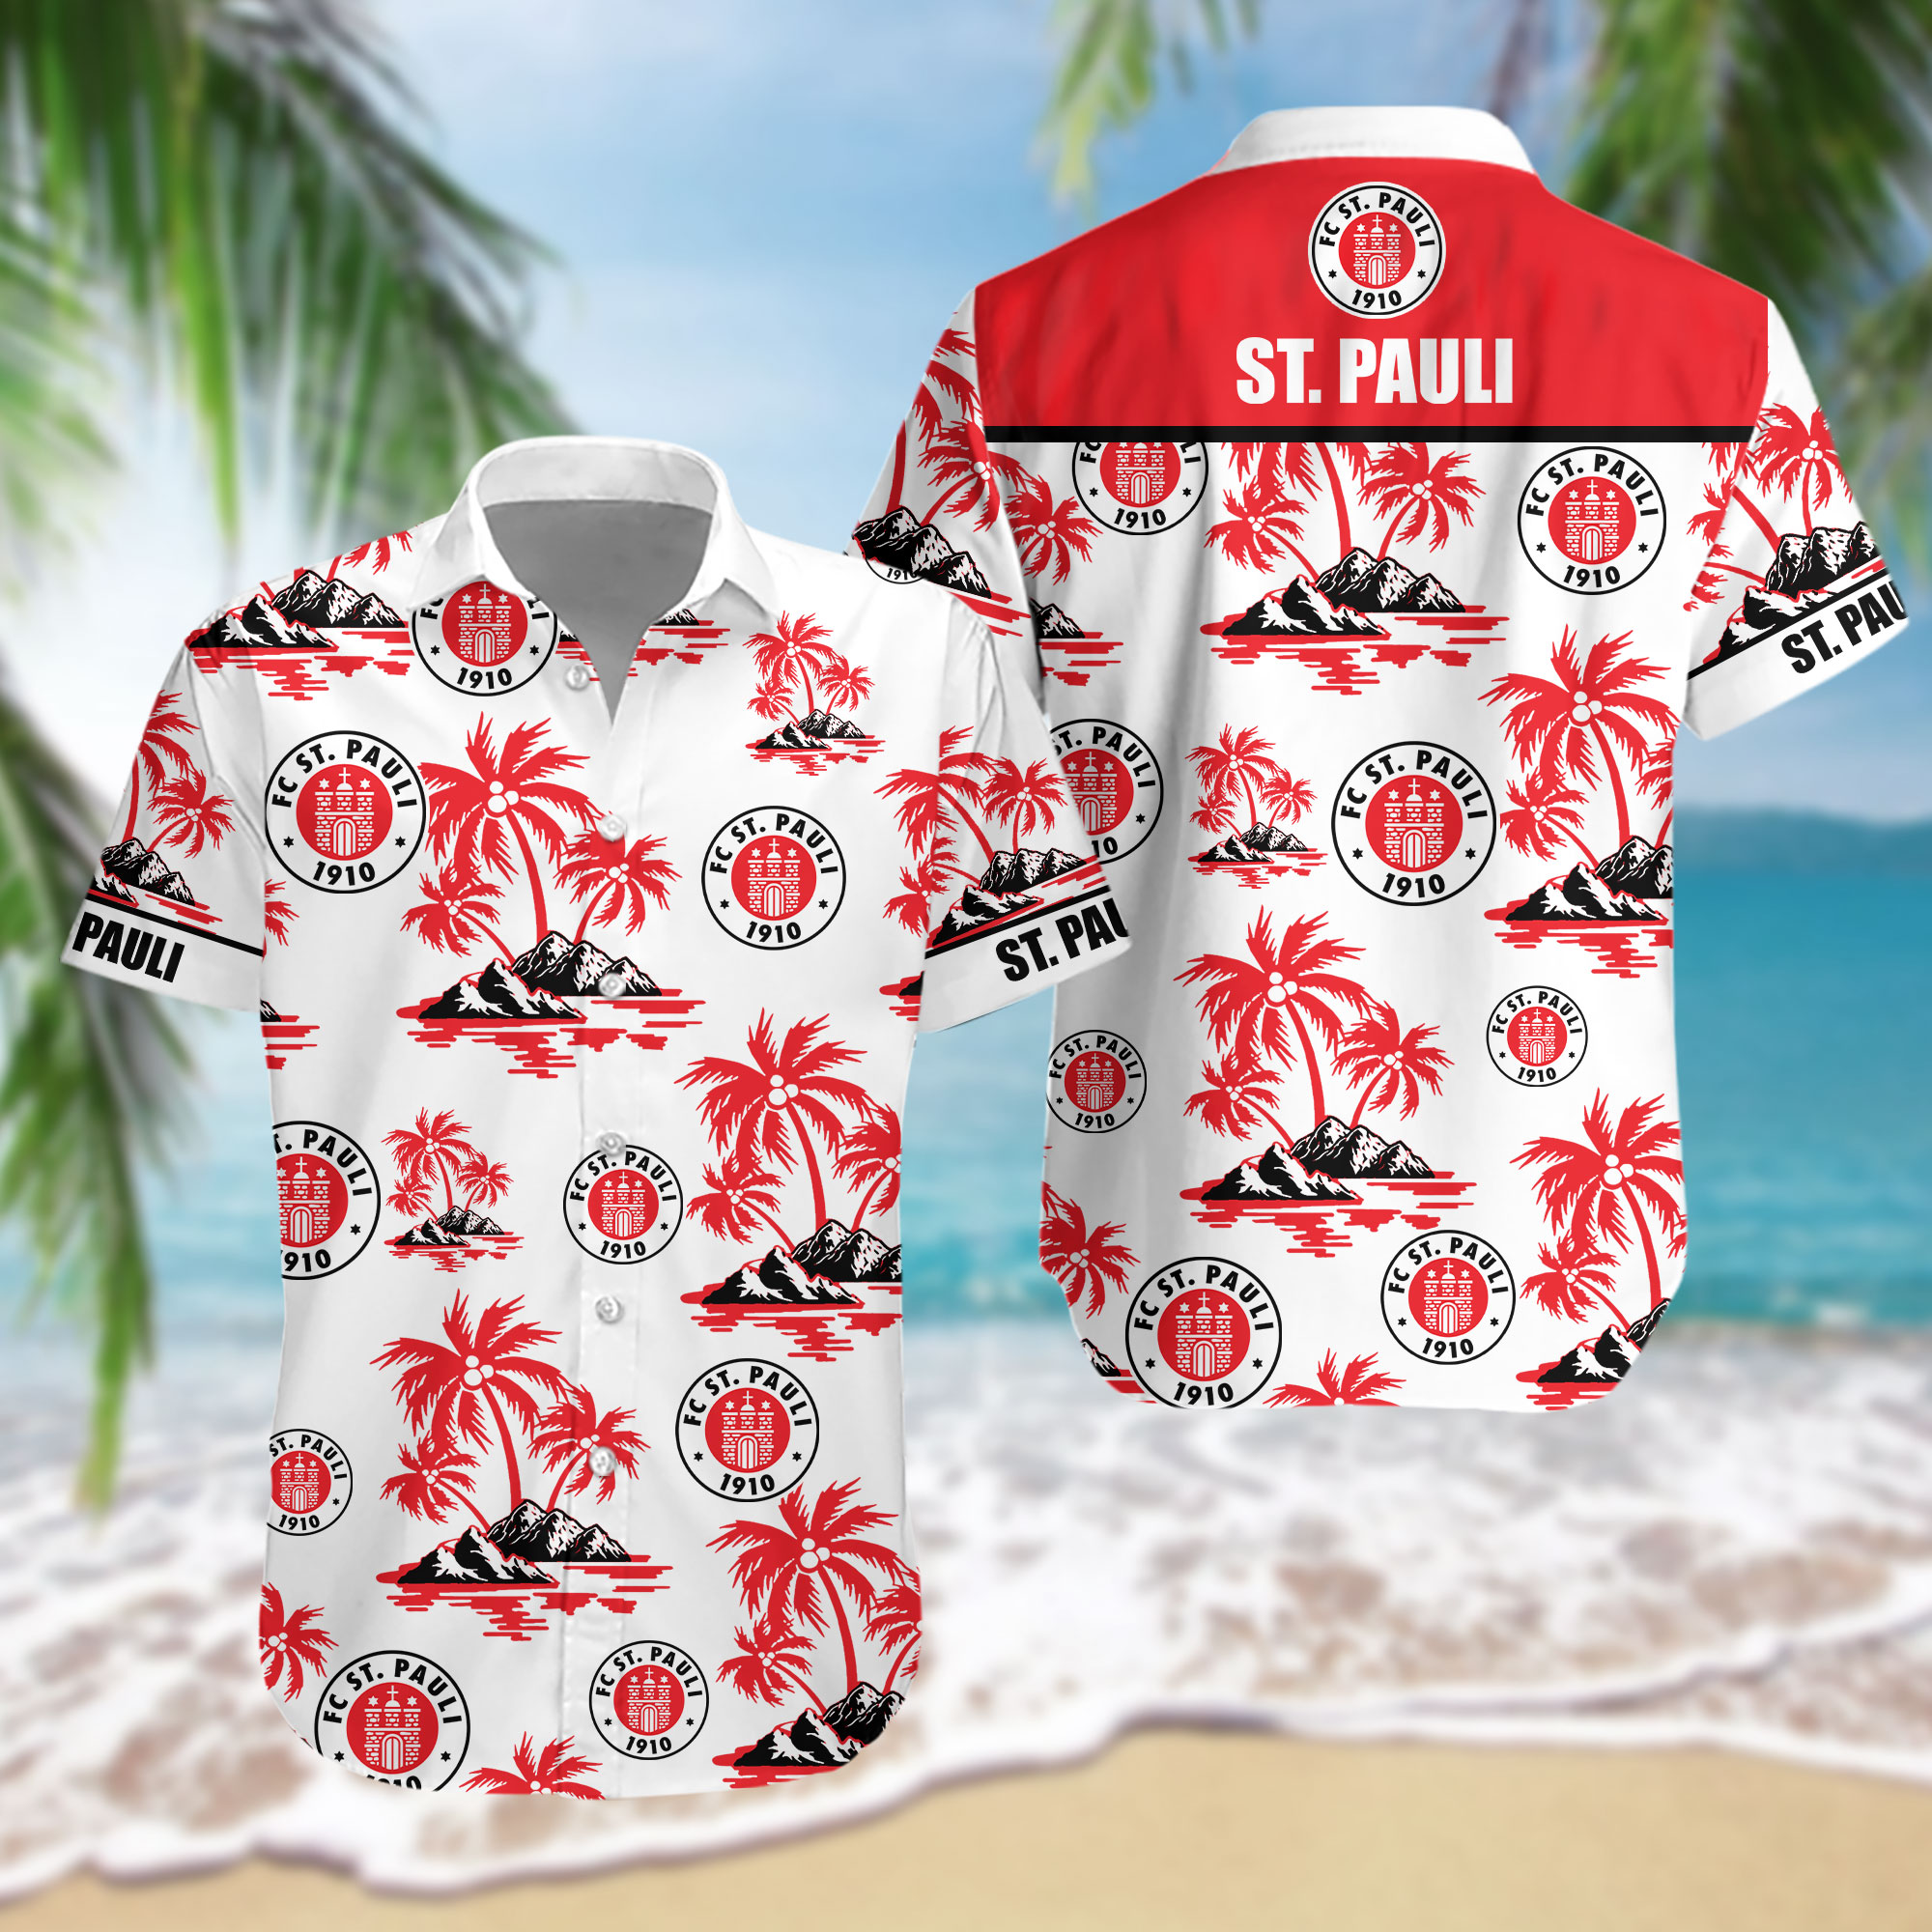 These Hawaiian Shirt will be a great choice for any type of occasion 48